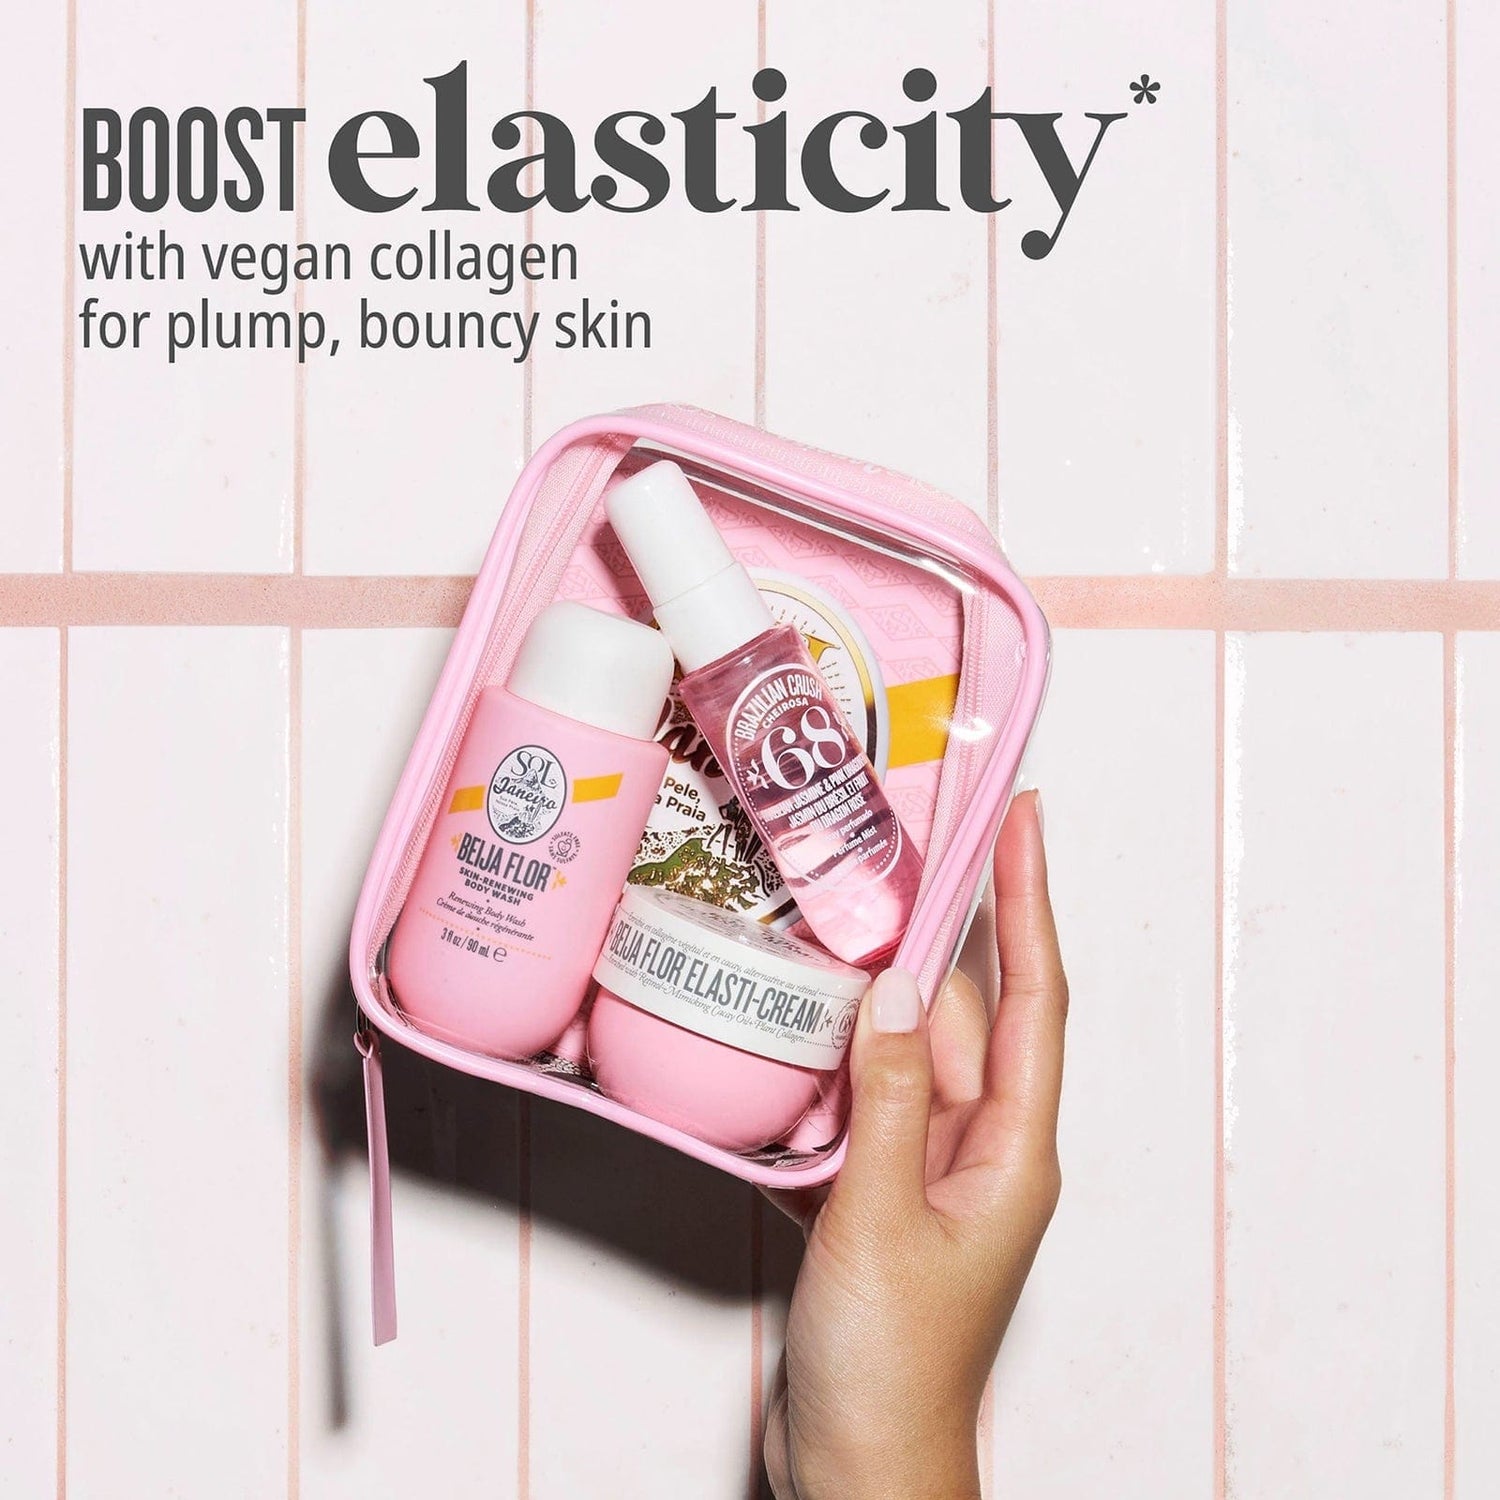 Boost elasticity* with vegan collagen for plump, bouncy skin